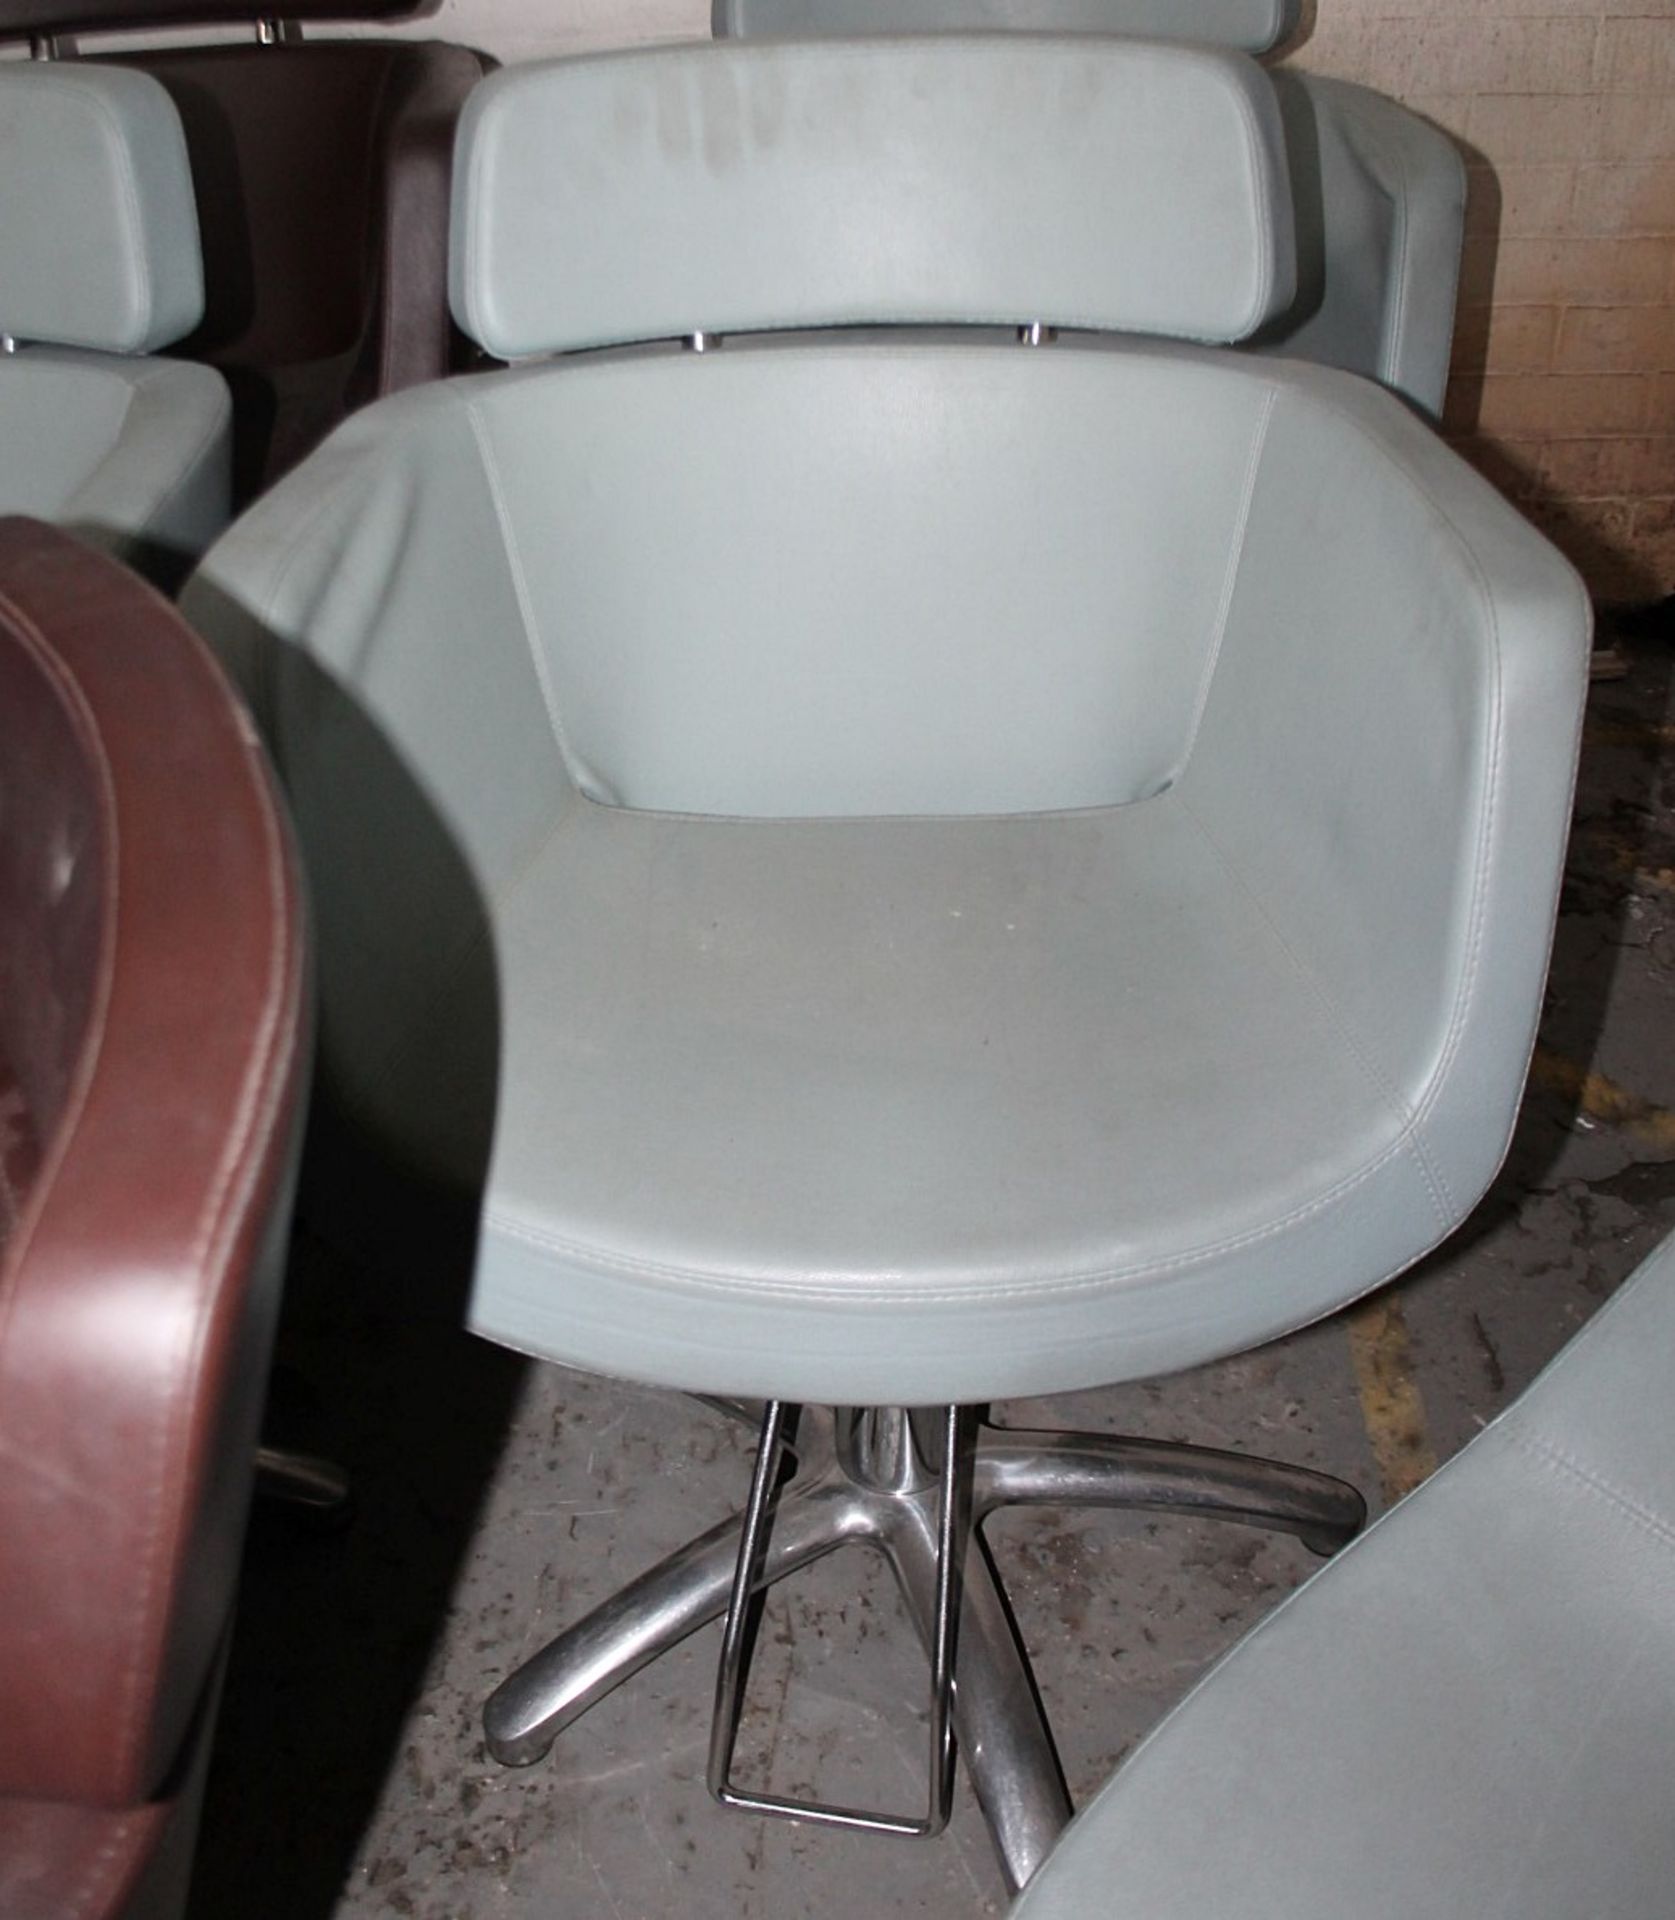 5 x Malet Branded Professional Hairdressing Salon Swivel Chairs In Brown / Blue *Please Read Full - Image 2 of 4